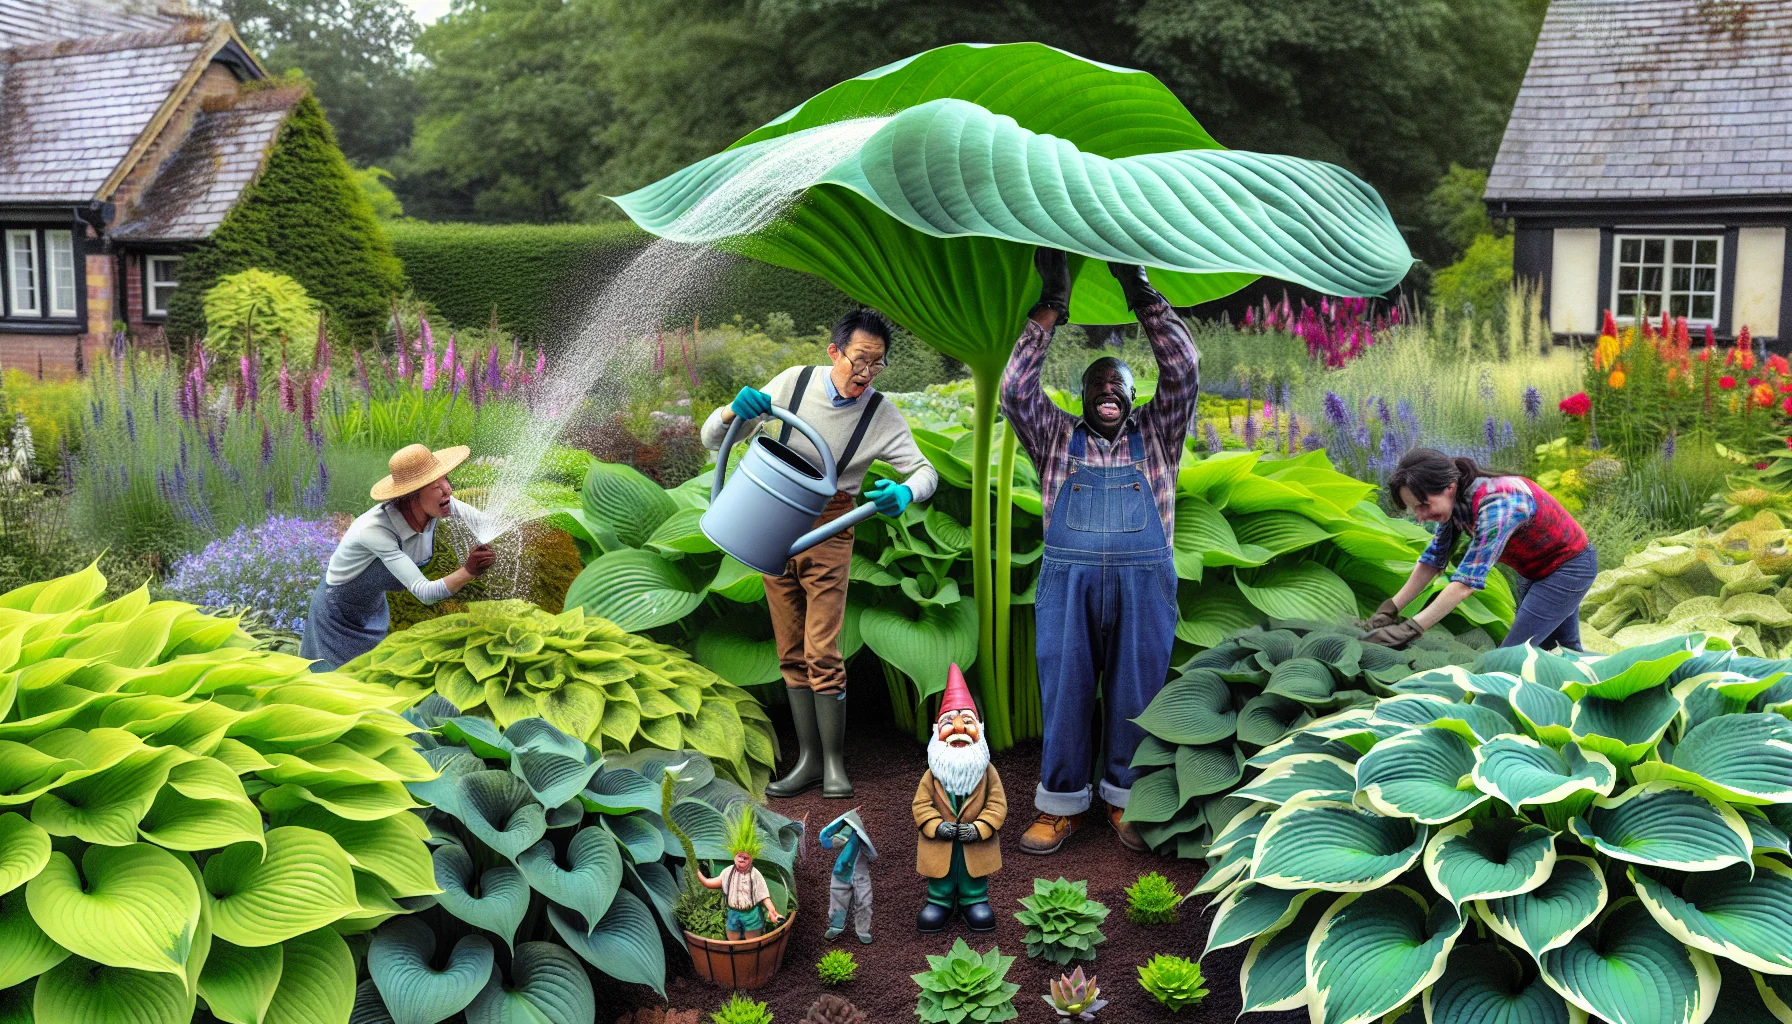 Imagine a humorous scene situated in a meticulously designed hosta garden. An Asian woman clumsily spills her watering can onto her gardening gloves while a Black man laughs, holding a giant, overgrown hosta leaf as if it was an umbrella shielding from the water. Nearby, a Middle Eastern child is seen trying to 'plant' a garden gnome upside down. All these quirky actions happen amidst a lush landscape filled with various types of hostas, ranging in color from vibrant green to cool blue, creating a visual symphony of foliage.